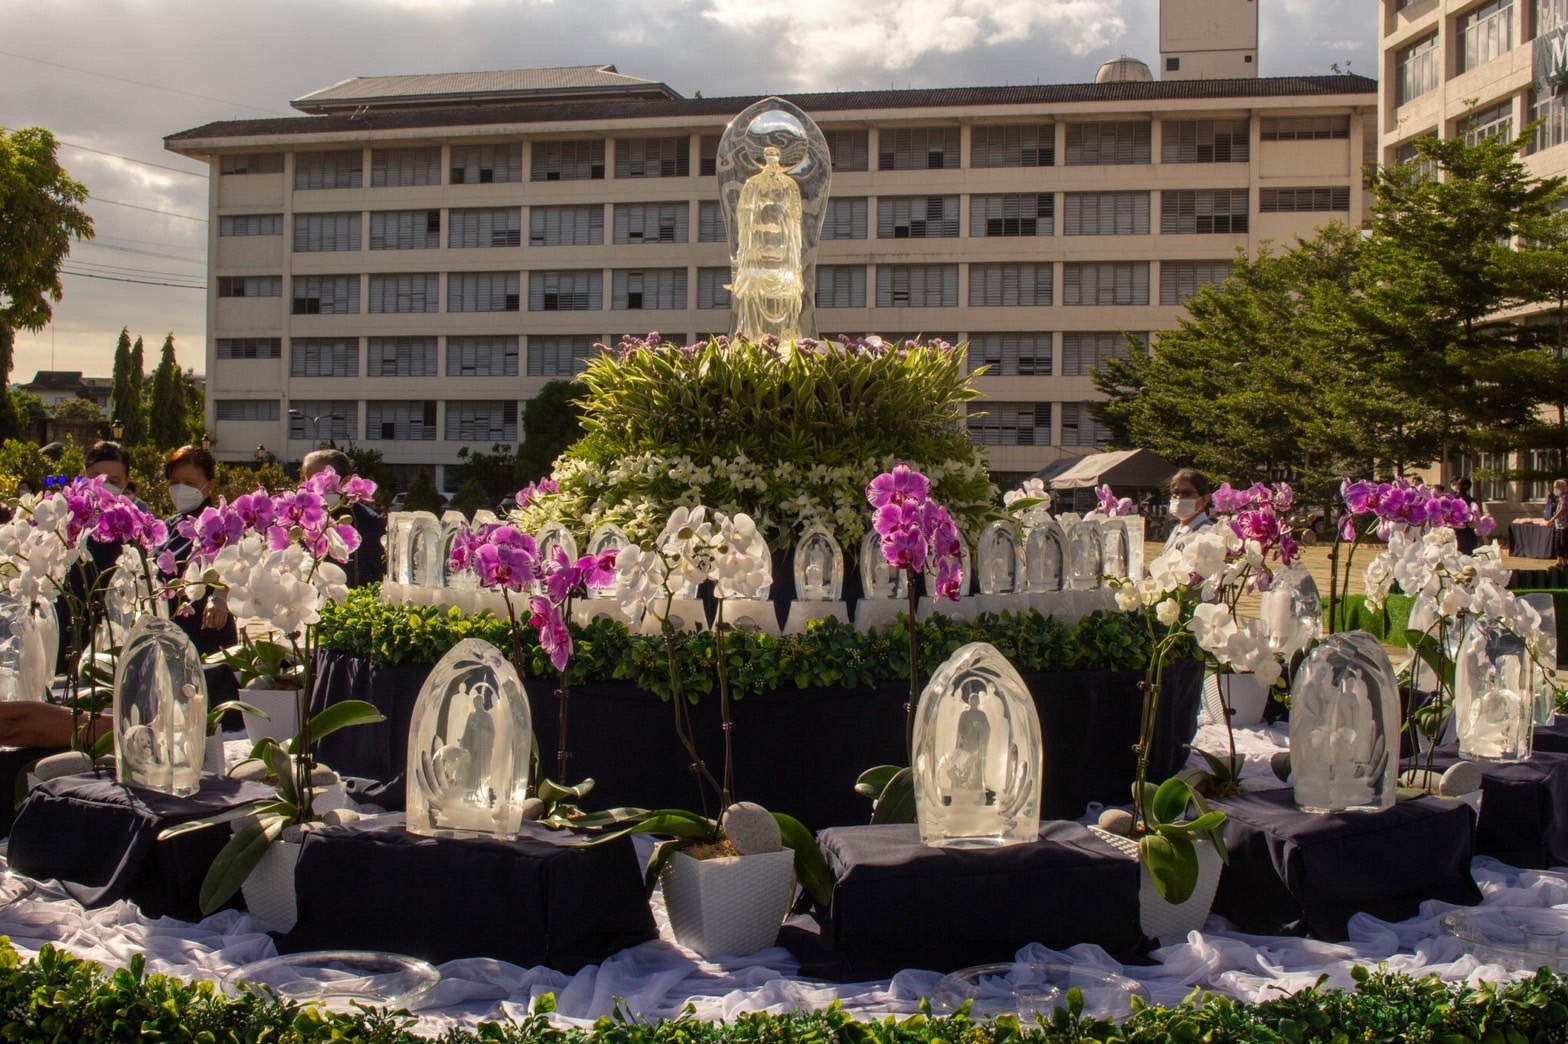 Flowers and greens surround crystal Buddhas of different sizes. 【Photo by Mavi Saldonido】